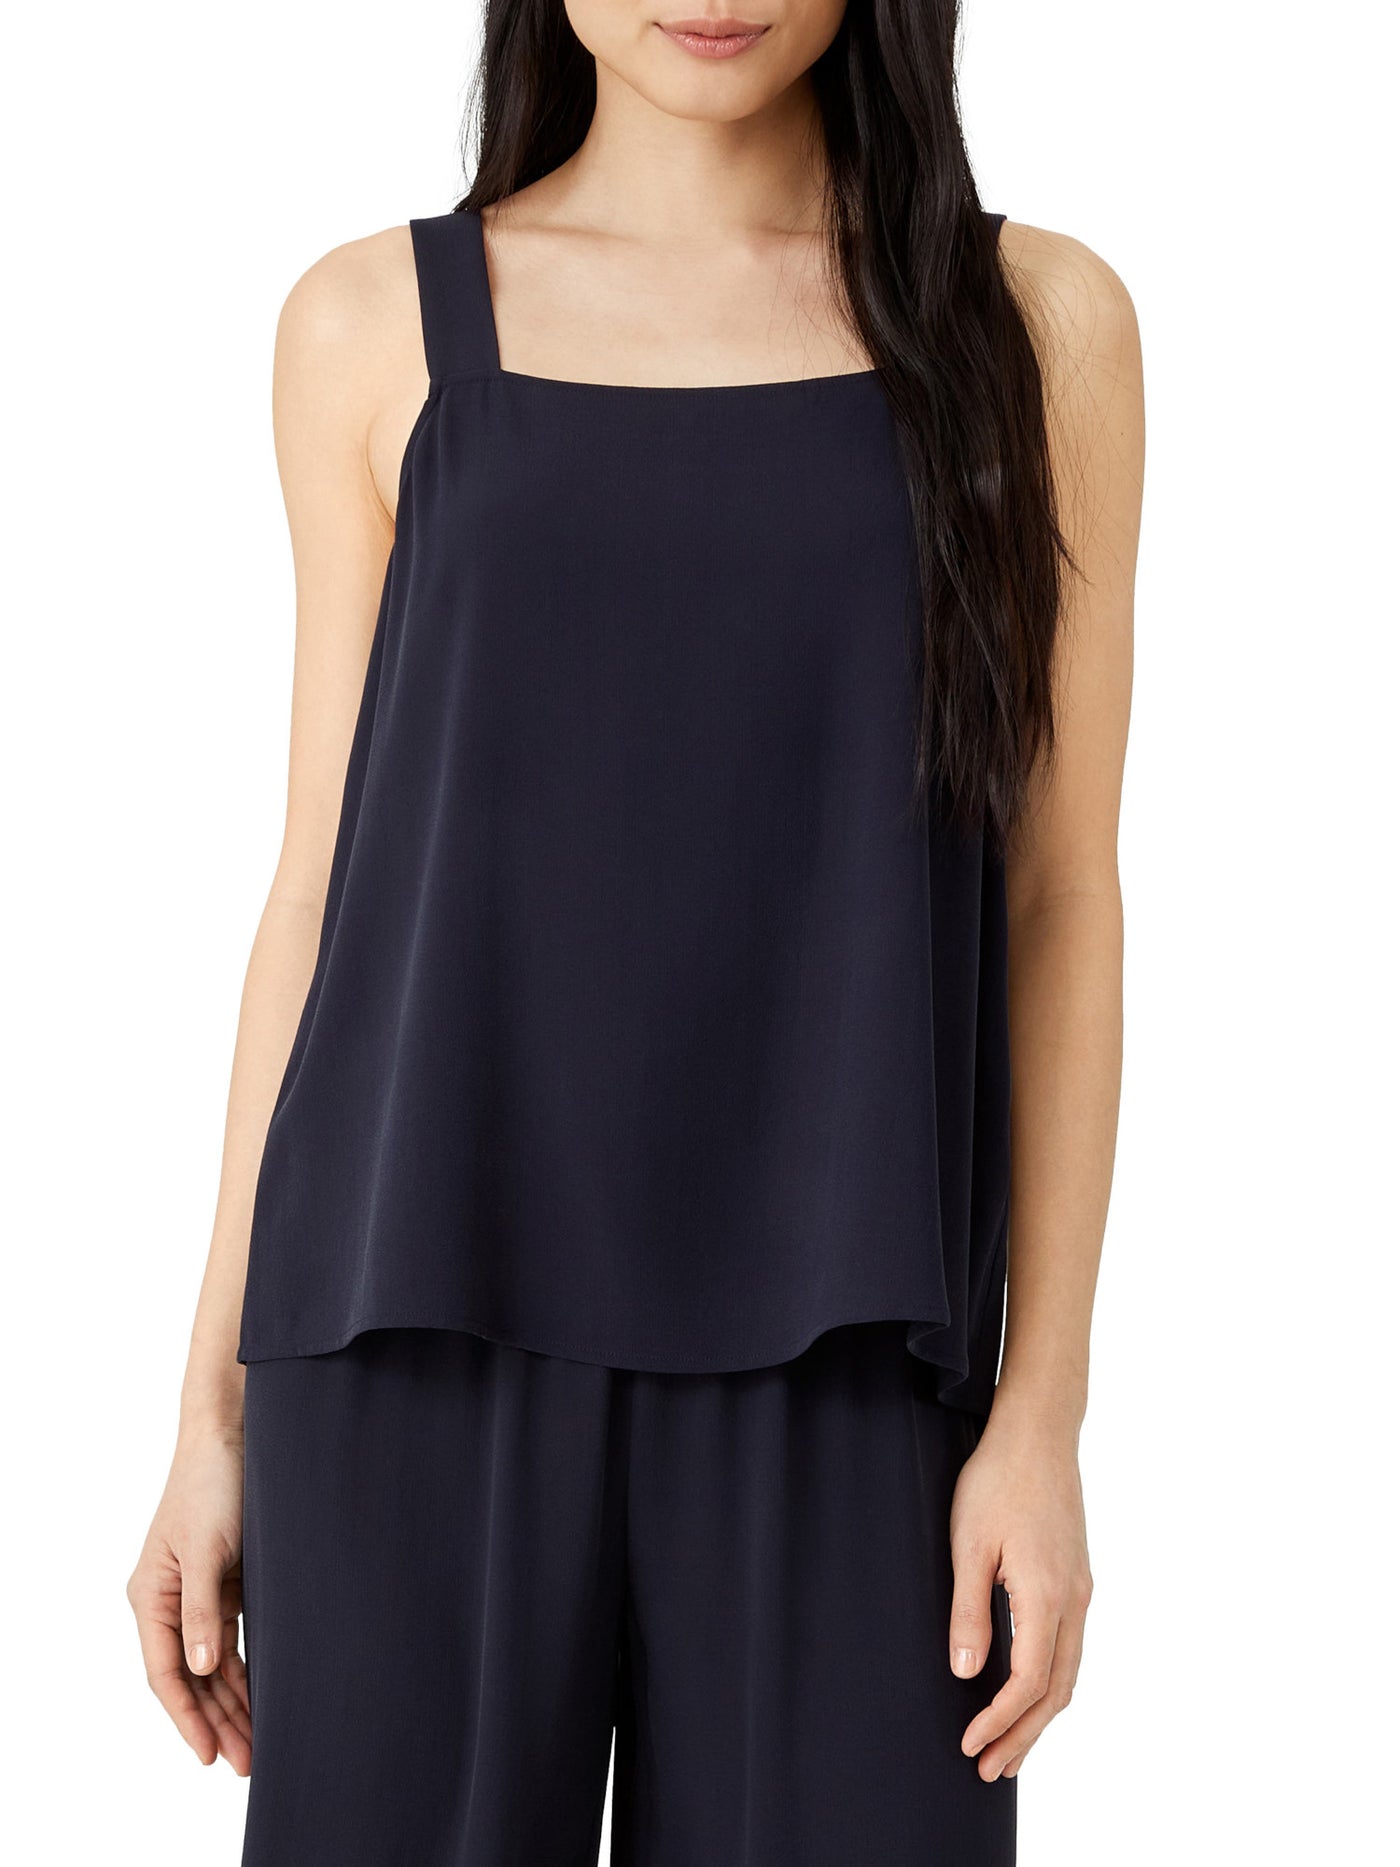 EILEEN FISHER Womens Navy Textured Unlined Sheer Zippered Sleeveless Square Neck Tank Top XS